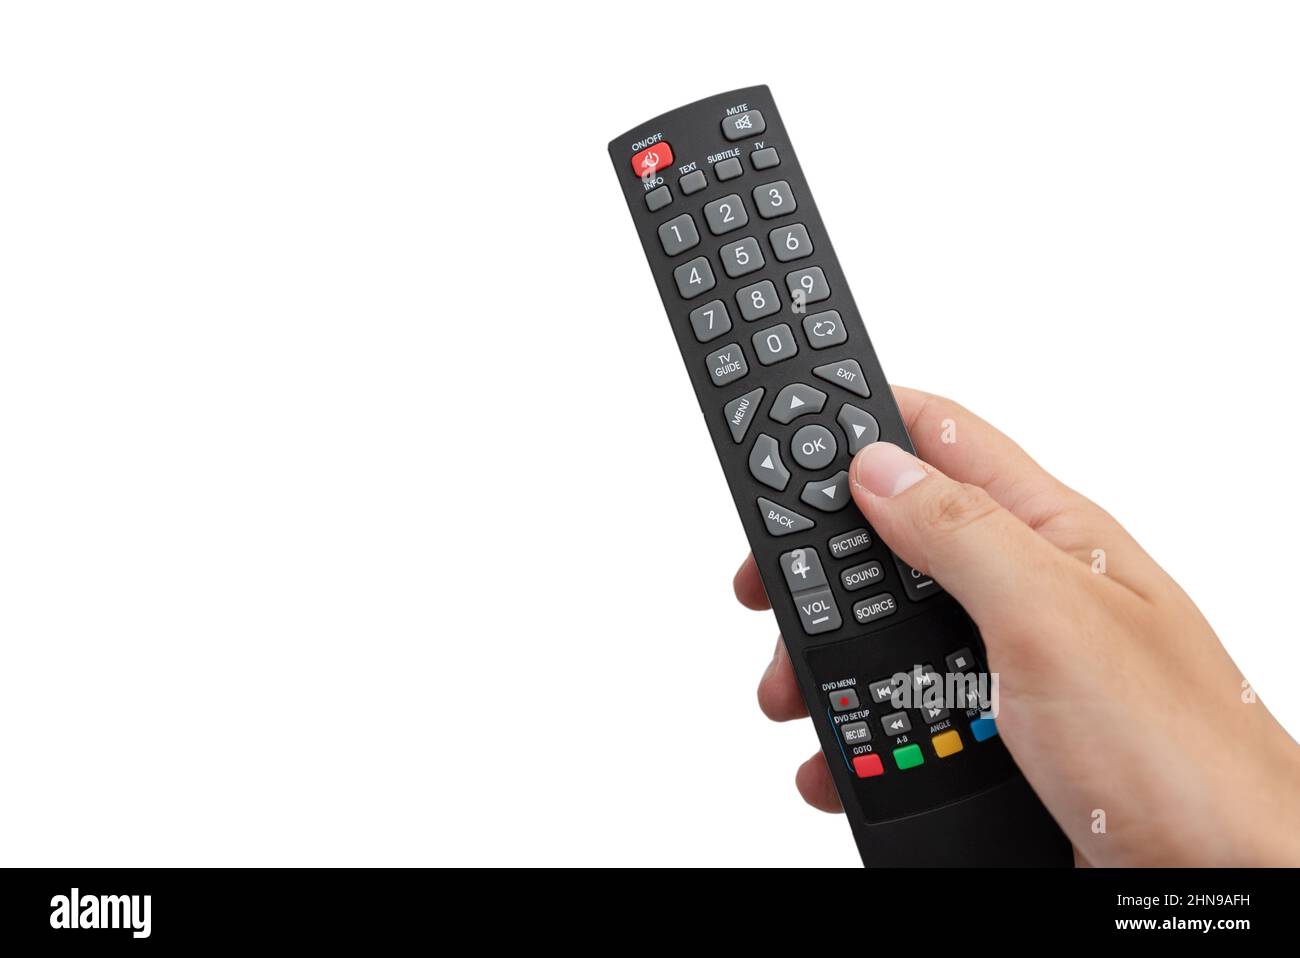 Hand holding remote control. Element isolated on white background Stock Photo